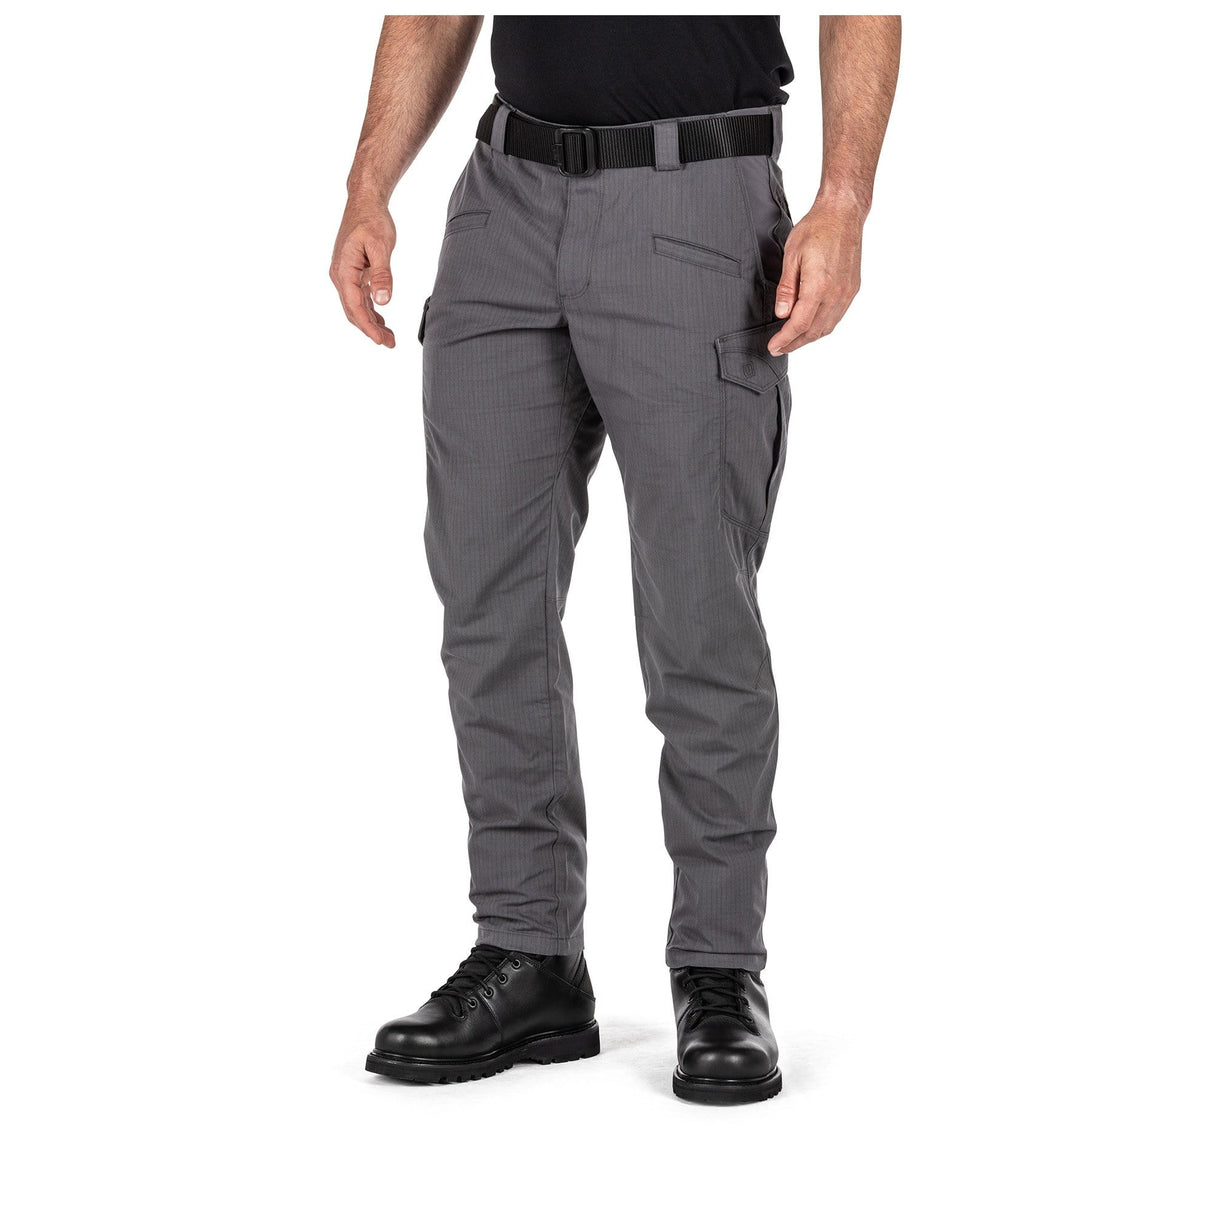 ICON PANT FLINT - 5.11 Tactical Finland Store